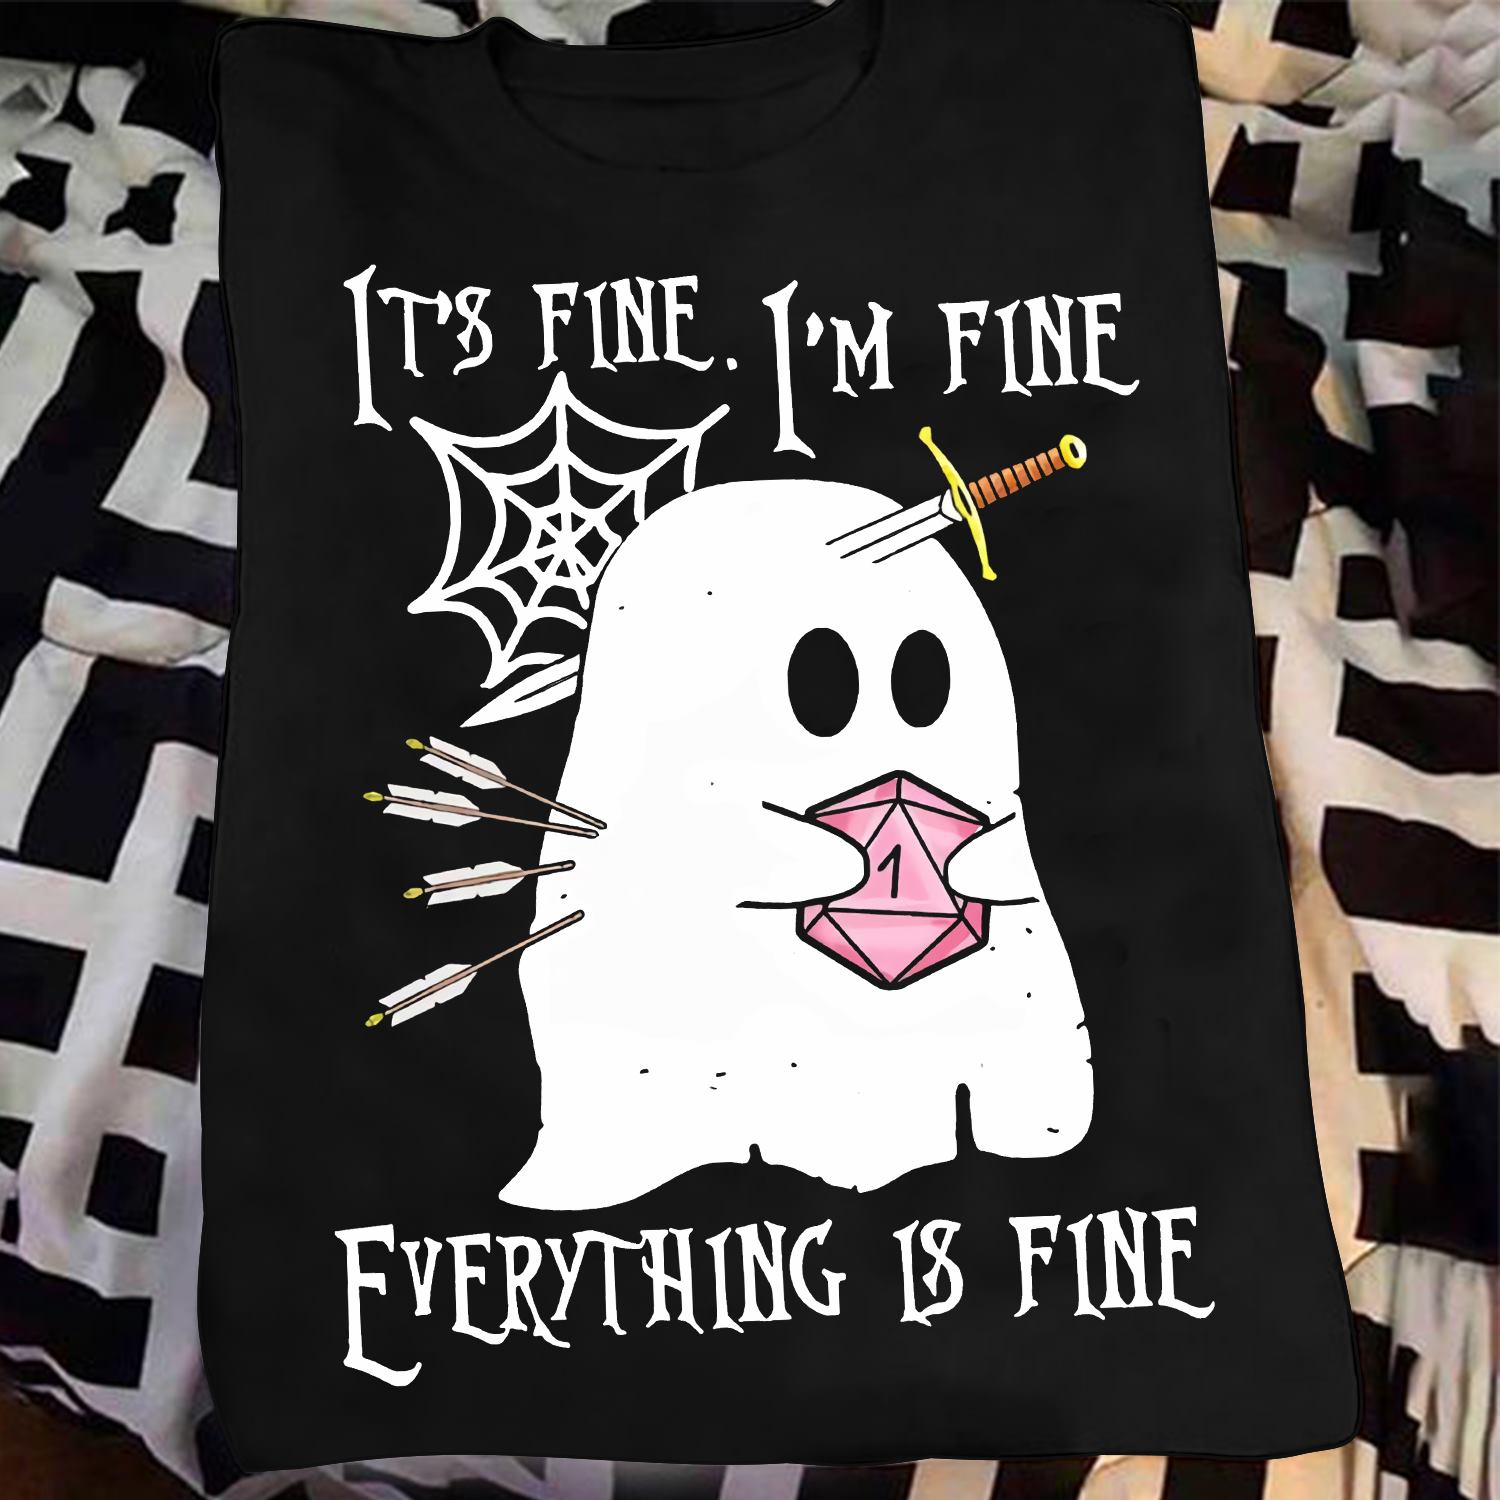 It's fine, I'm fine, everything is fine - D&d game white ghost, halloween white ghost costume